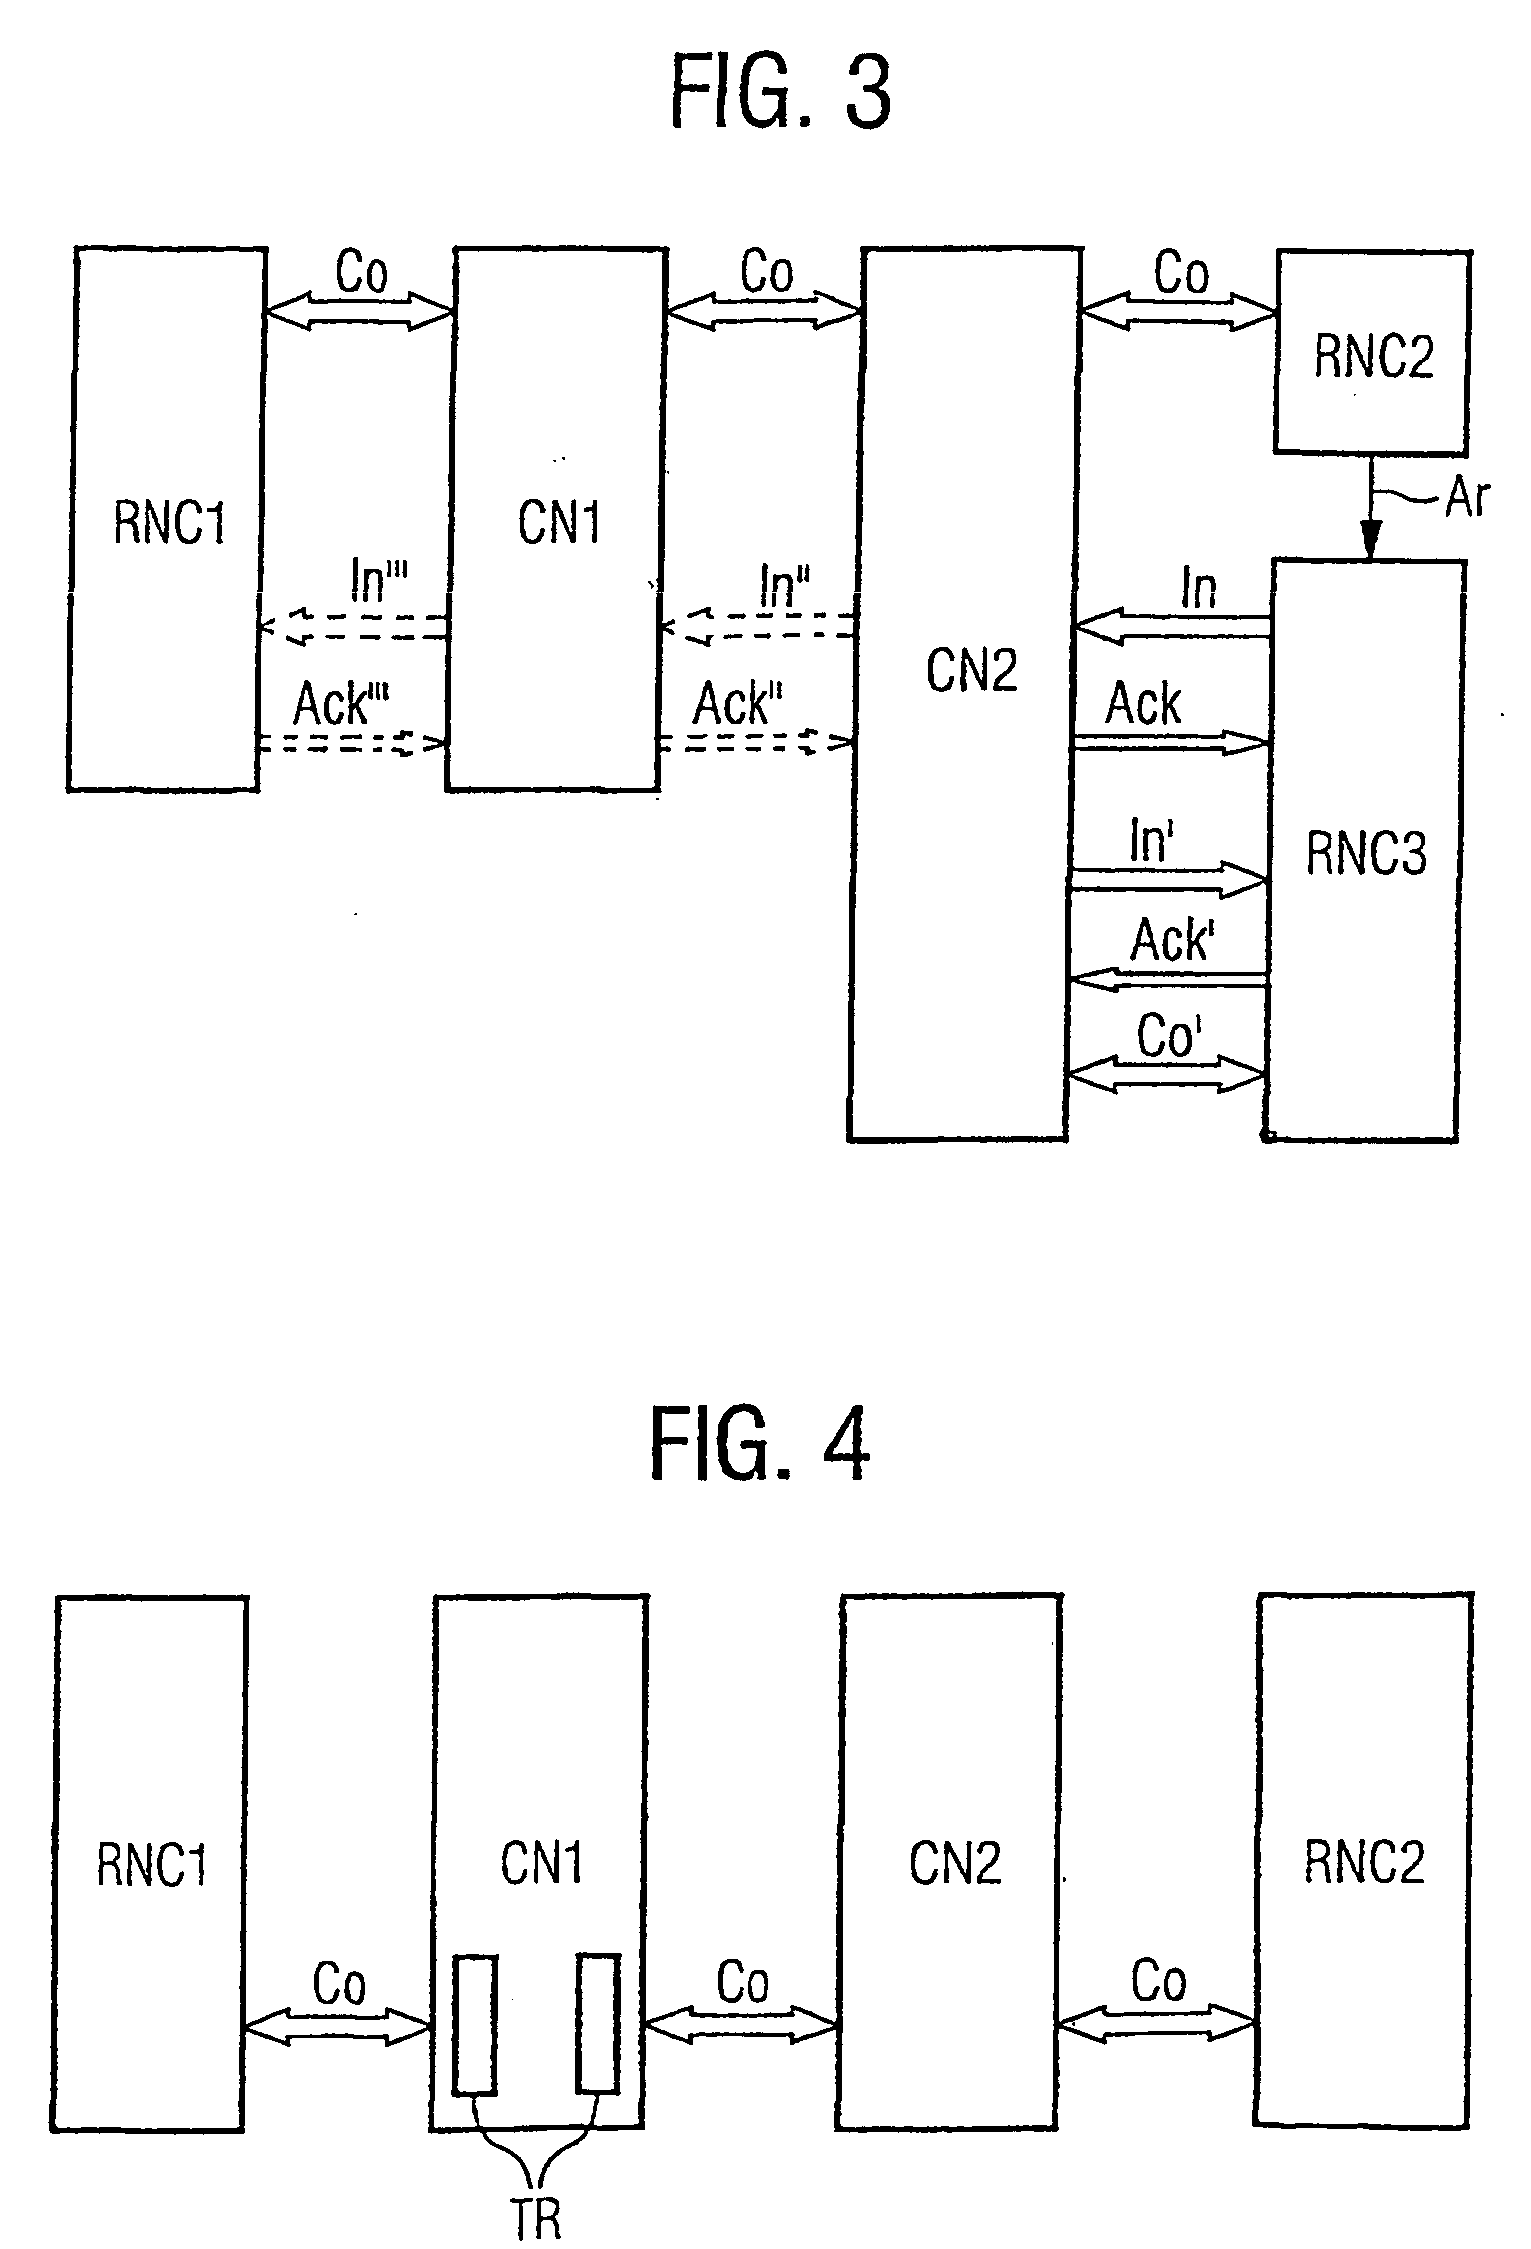 Method for a connection through a core network